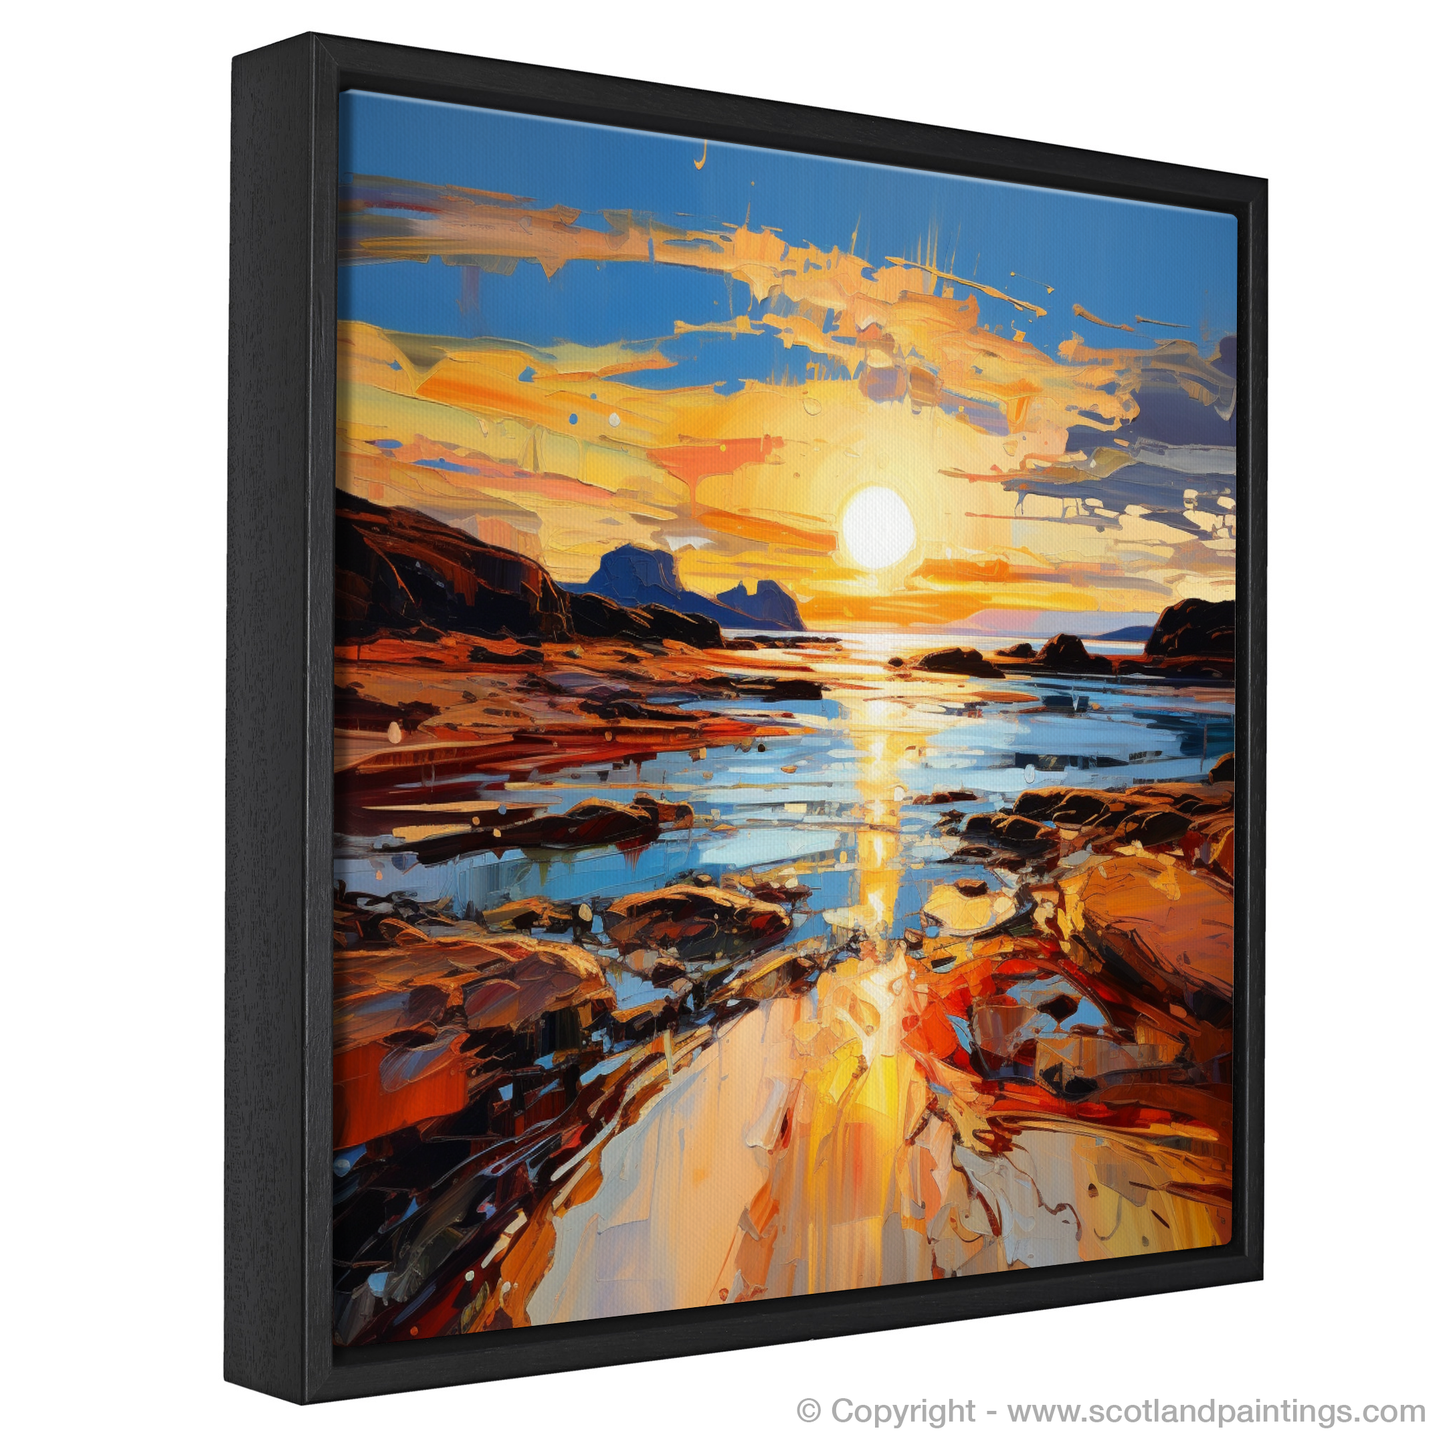 Painting and Art Print of Sound of Iona at golden hour entitled "Golden Hour Symphony: The Sound of Iona".